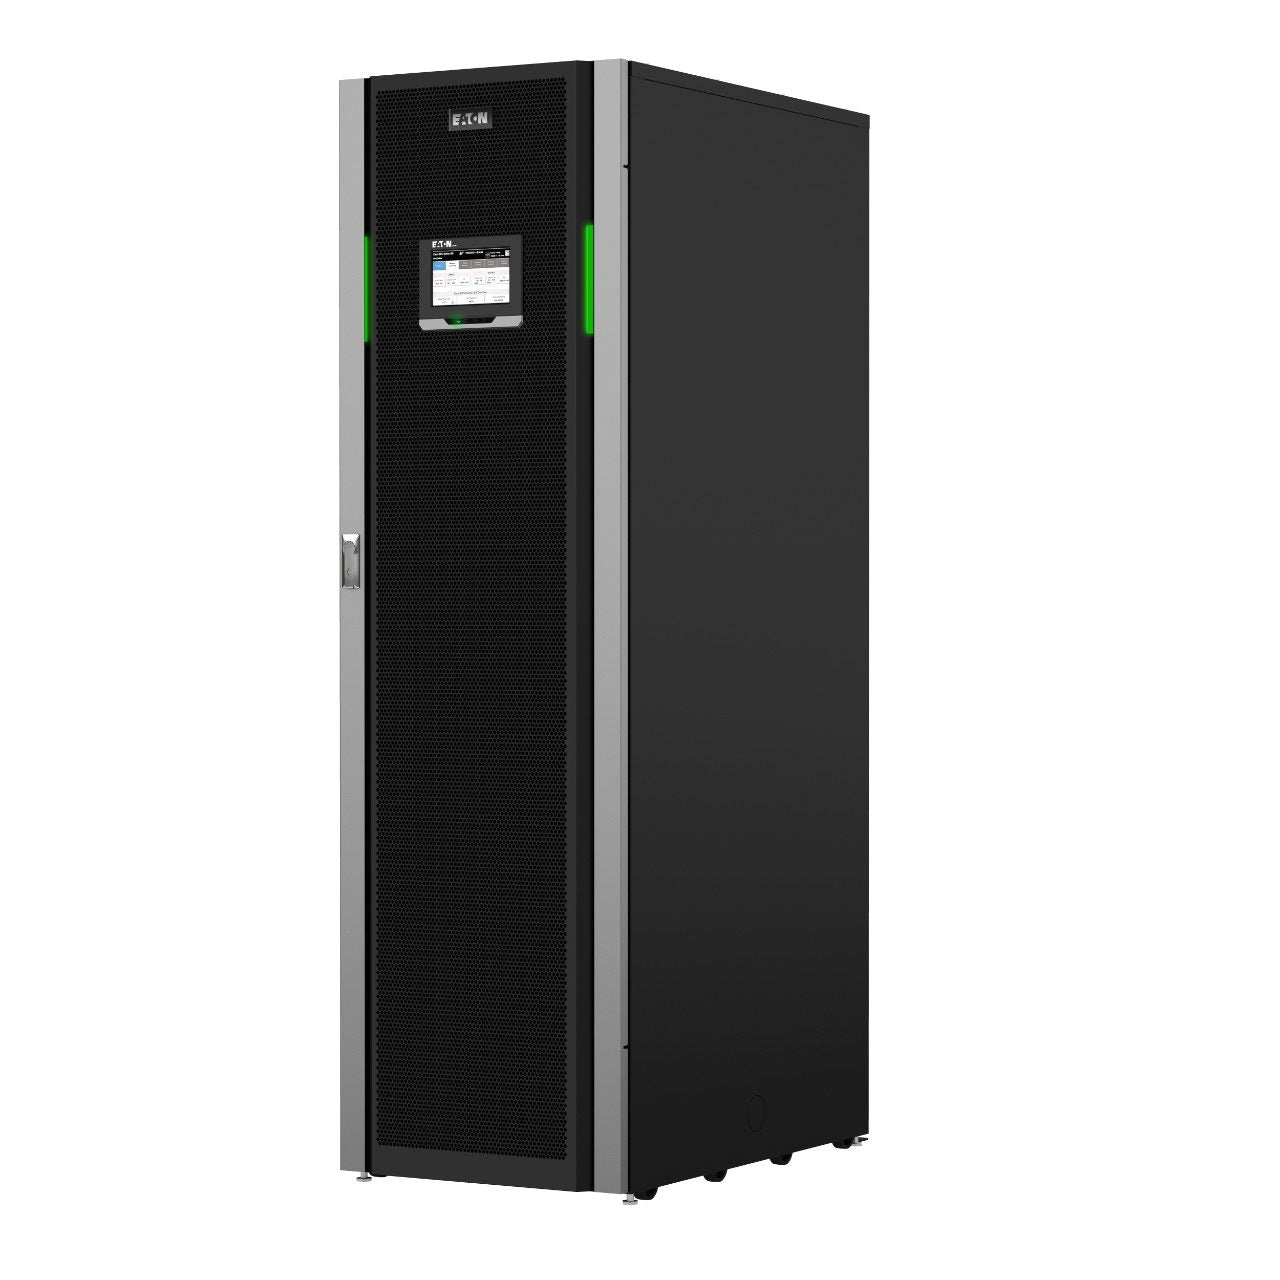 50kW, 1 UPM, scalable to 100kW, with Input switch, MBS & Battery Breaker 93PM50-100-MBS